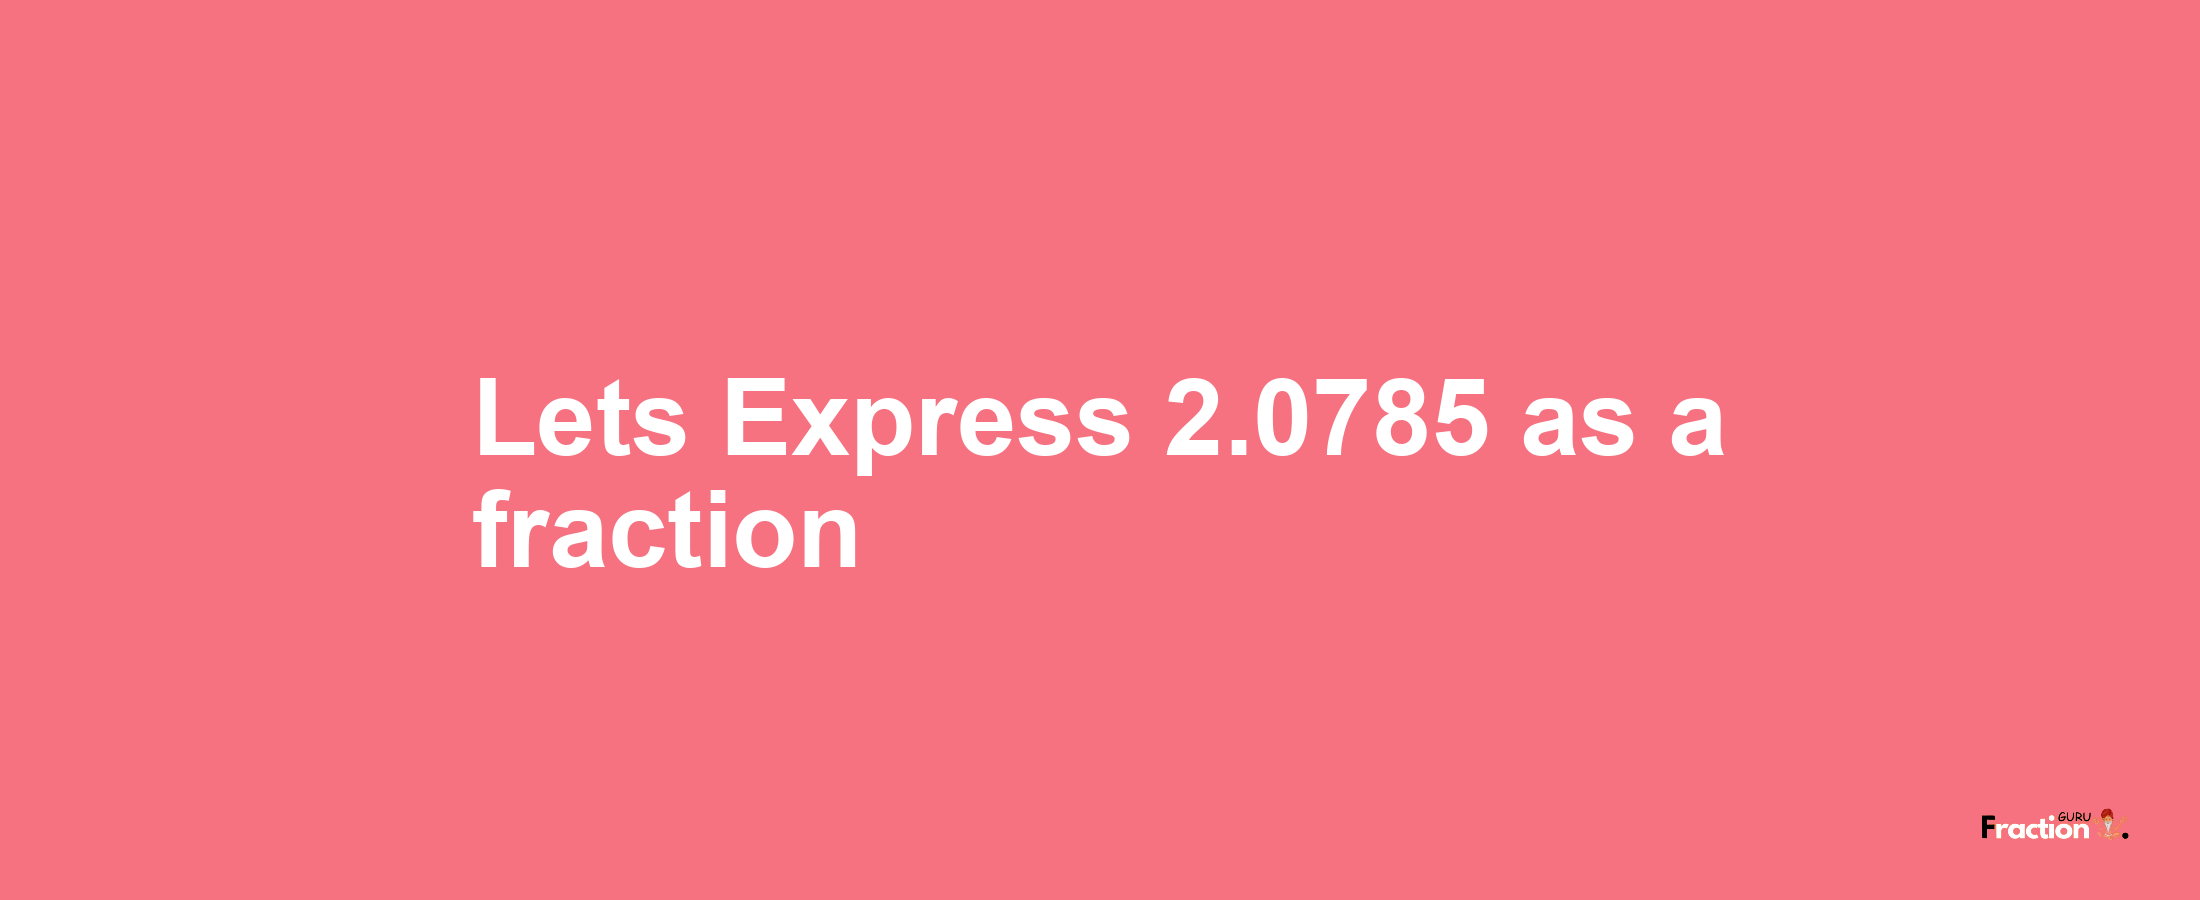 Lets Express 2.0785 as afraction